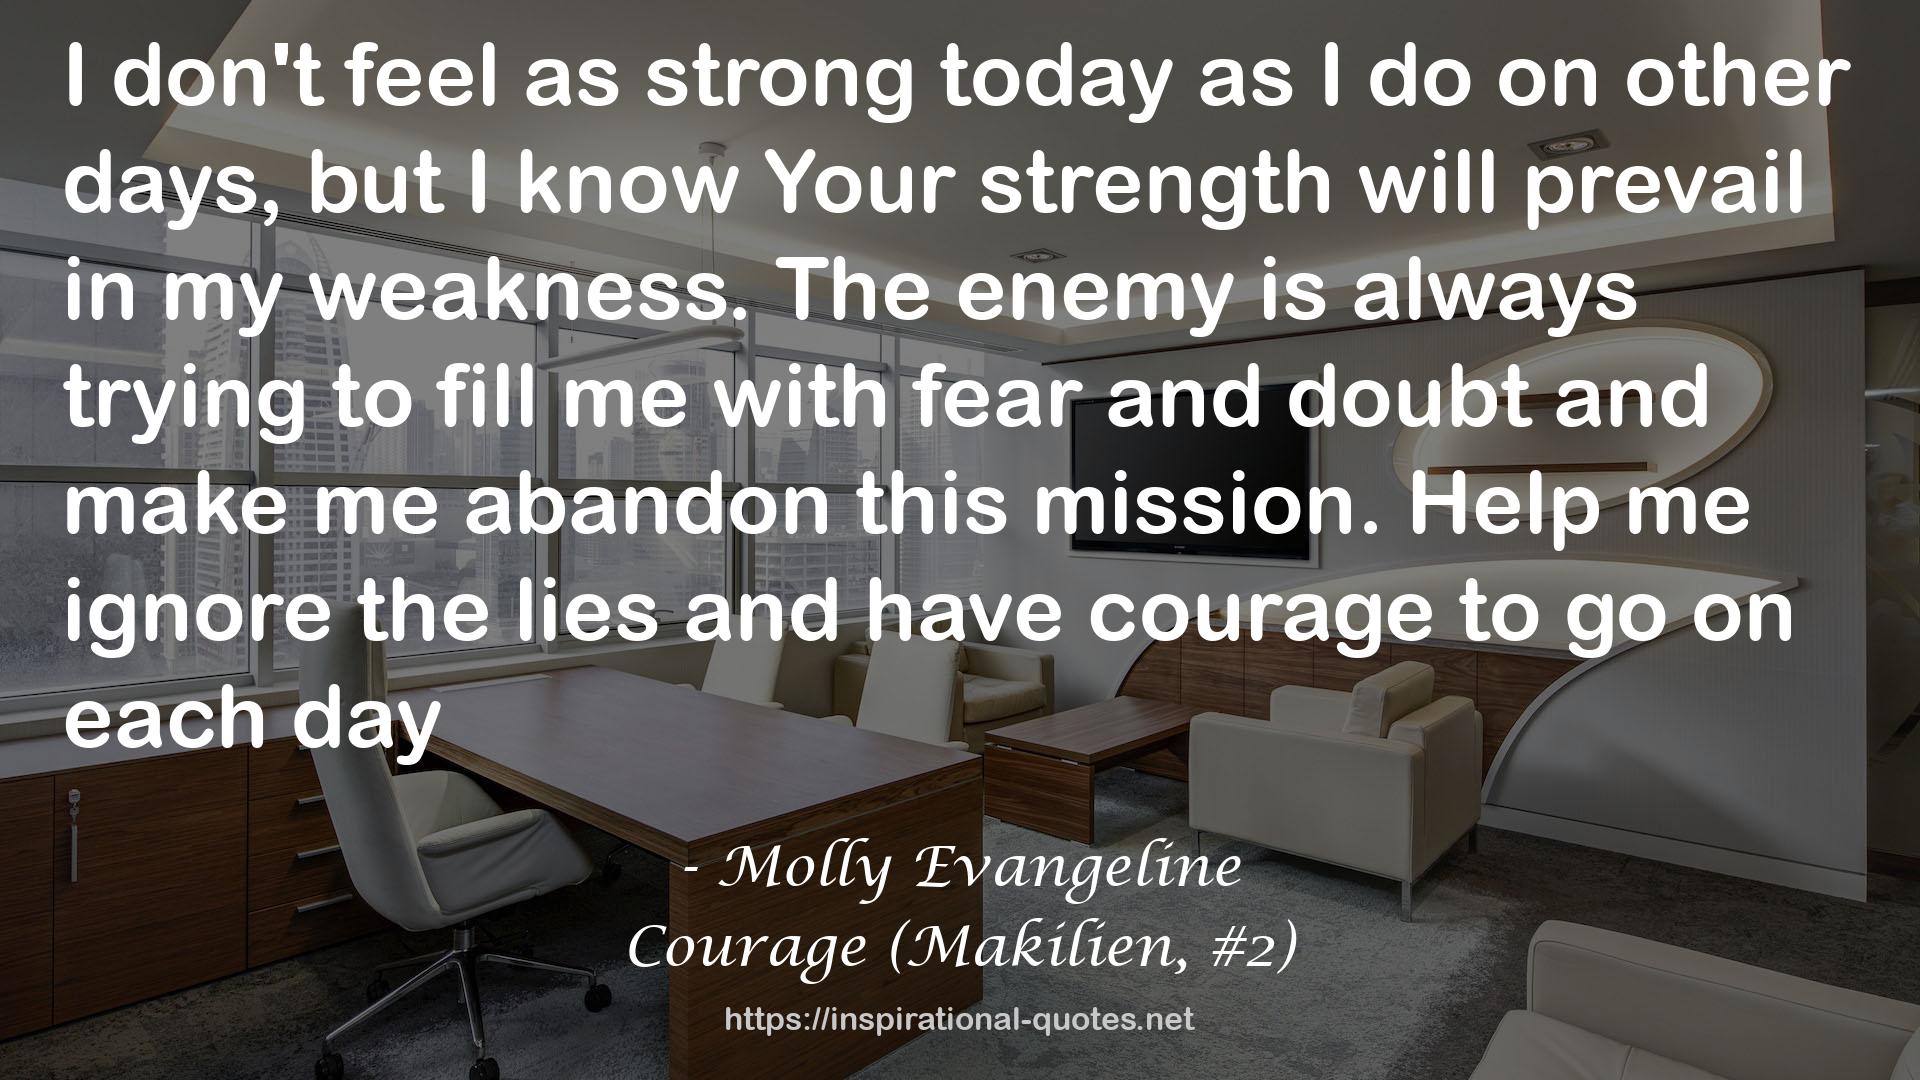 Courage (Makilien, #2) QUOTES